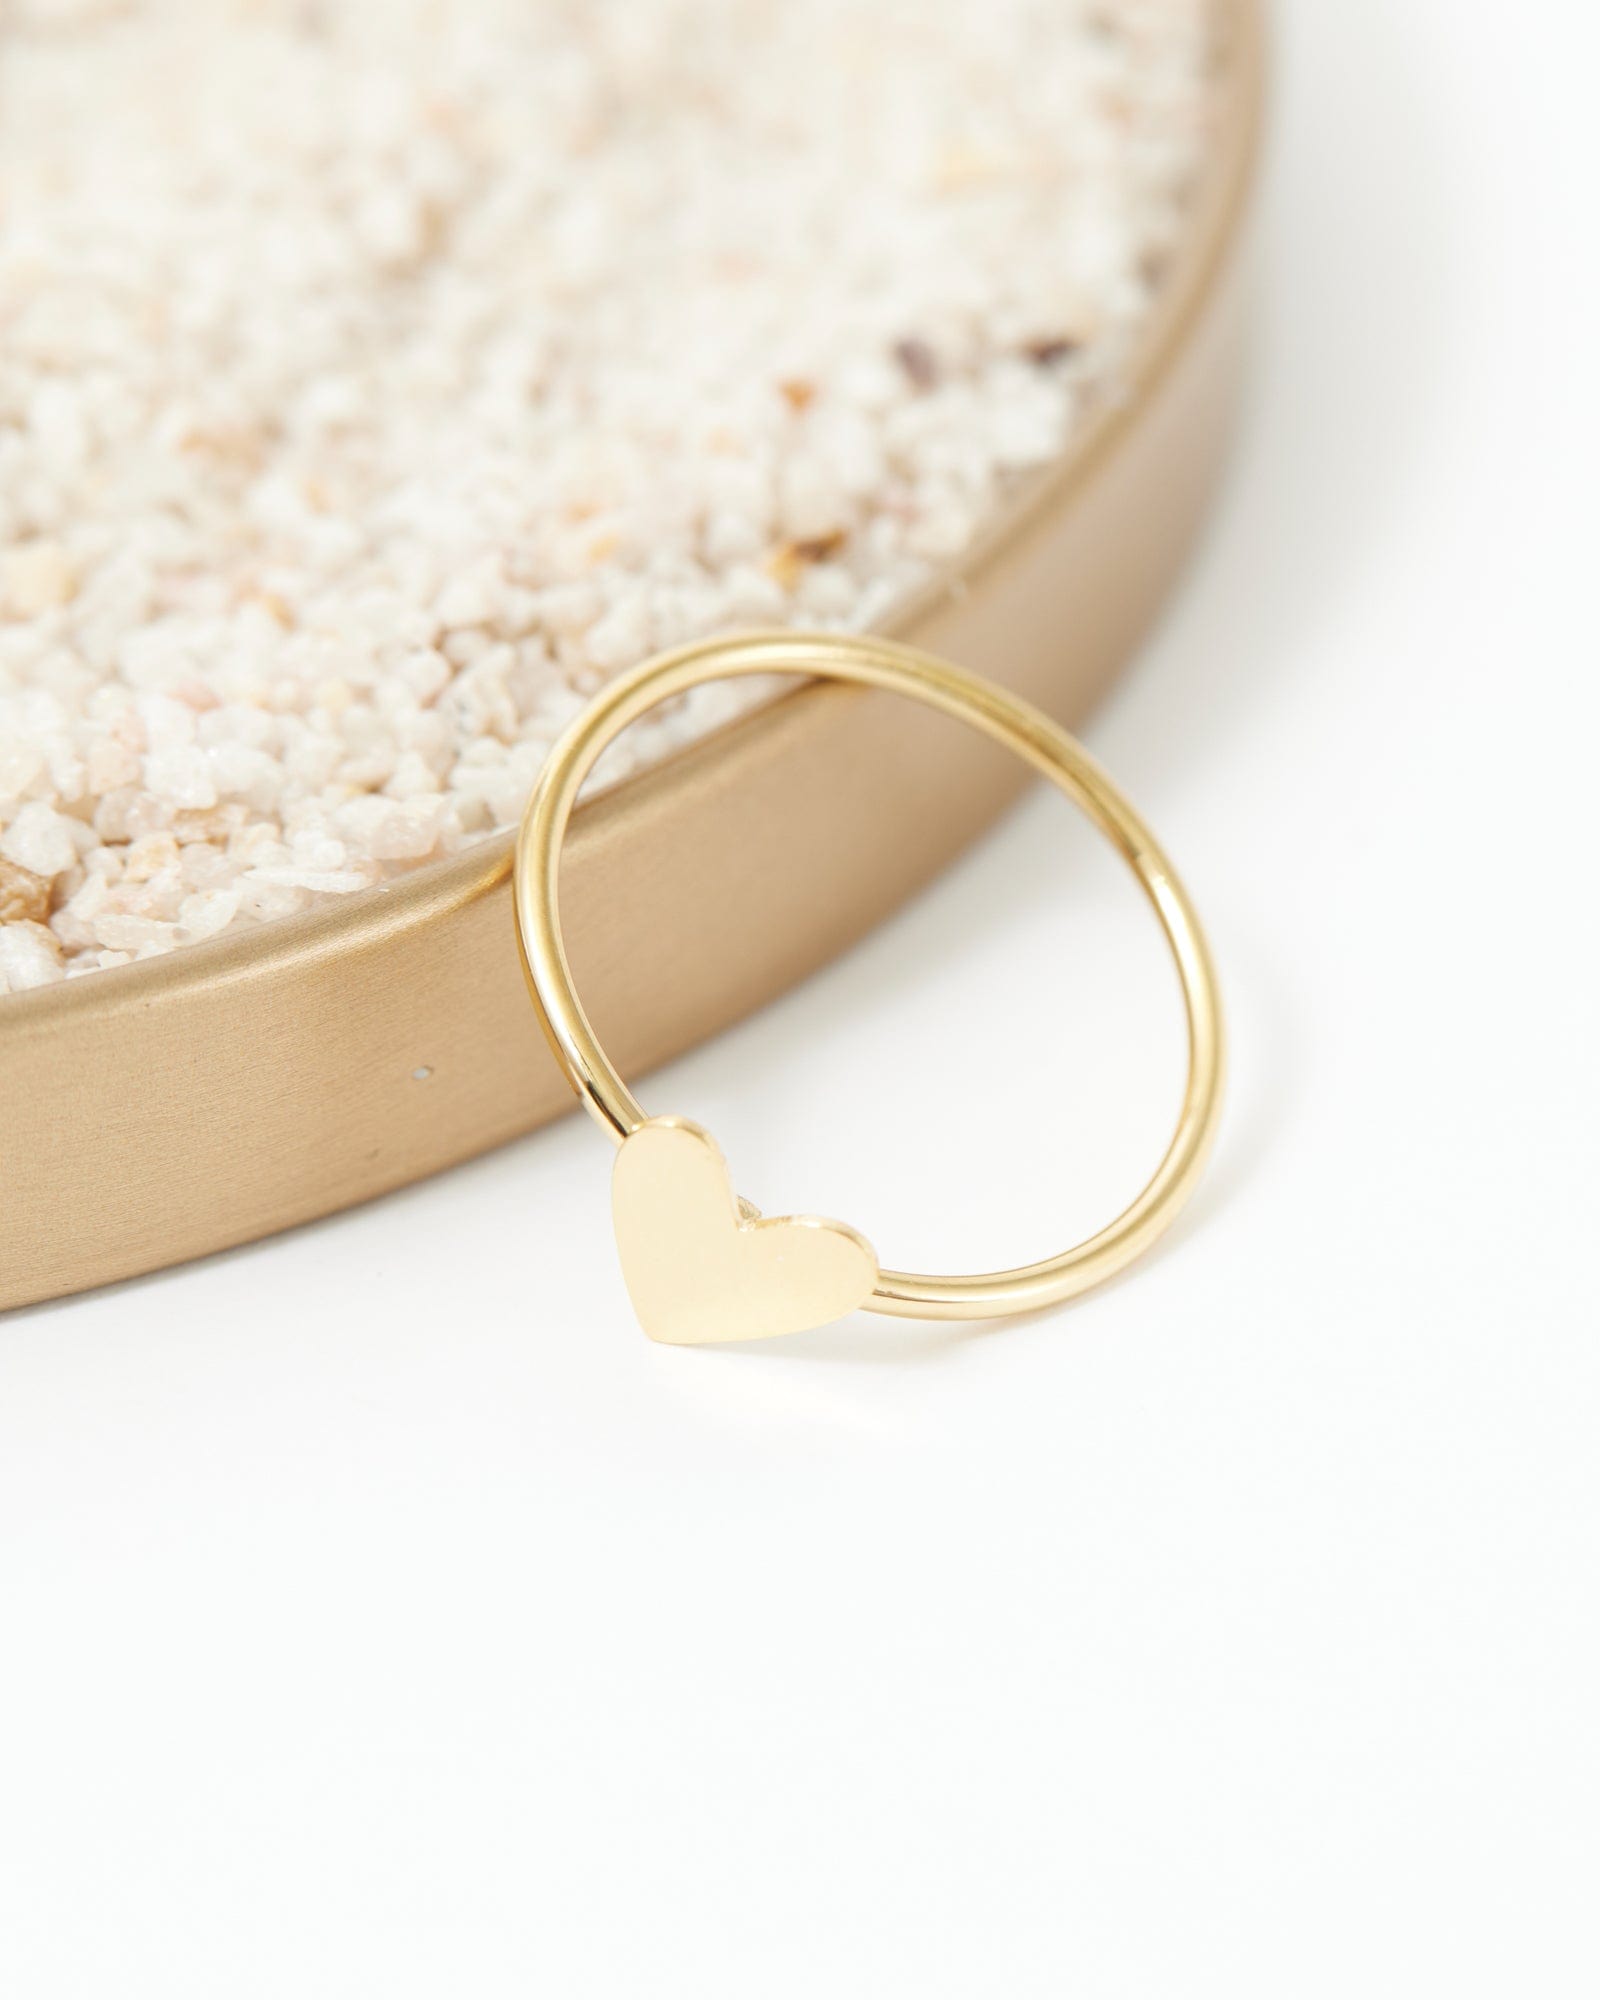 Gold dainty ring with heart on it